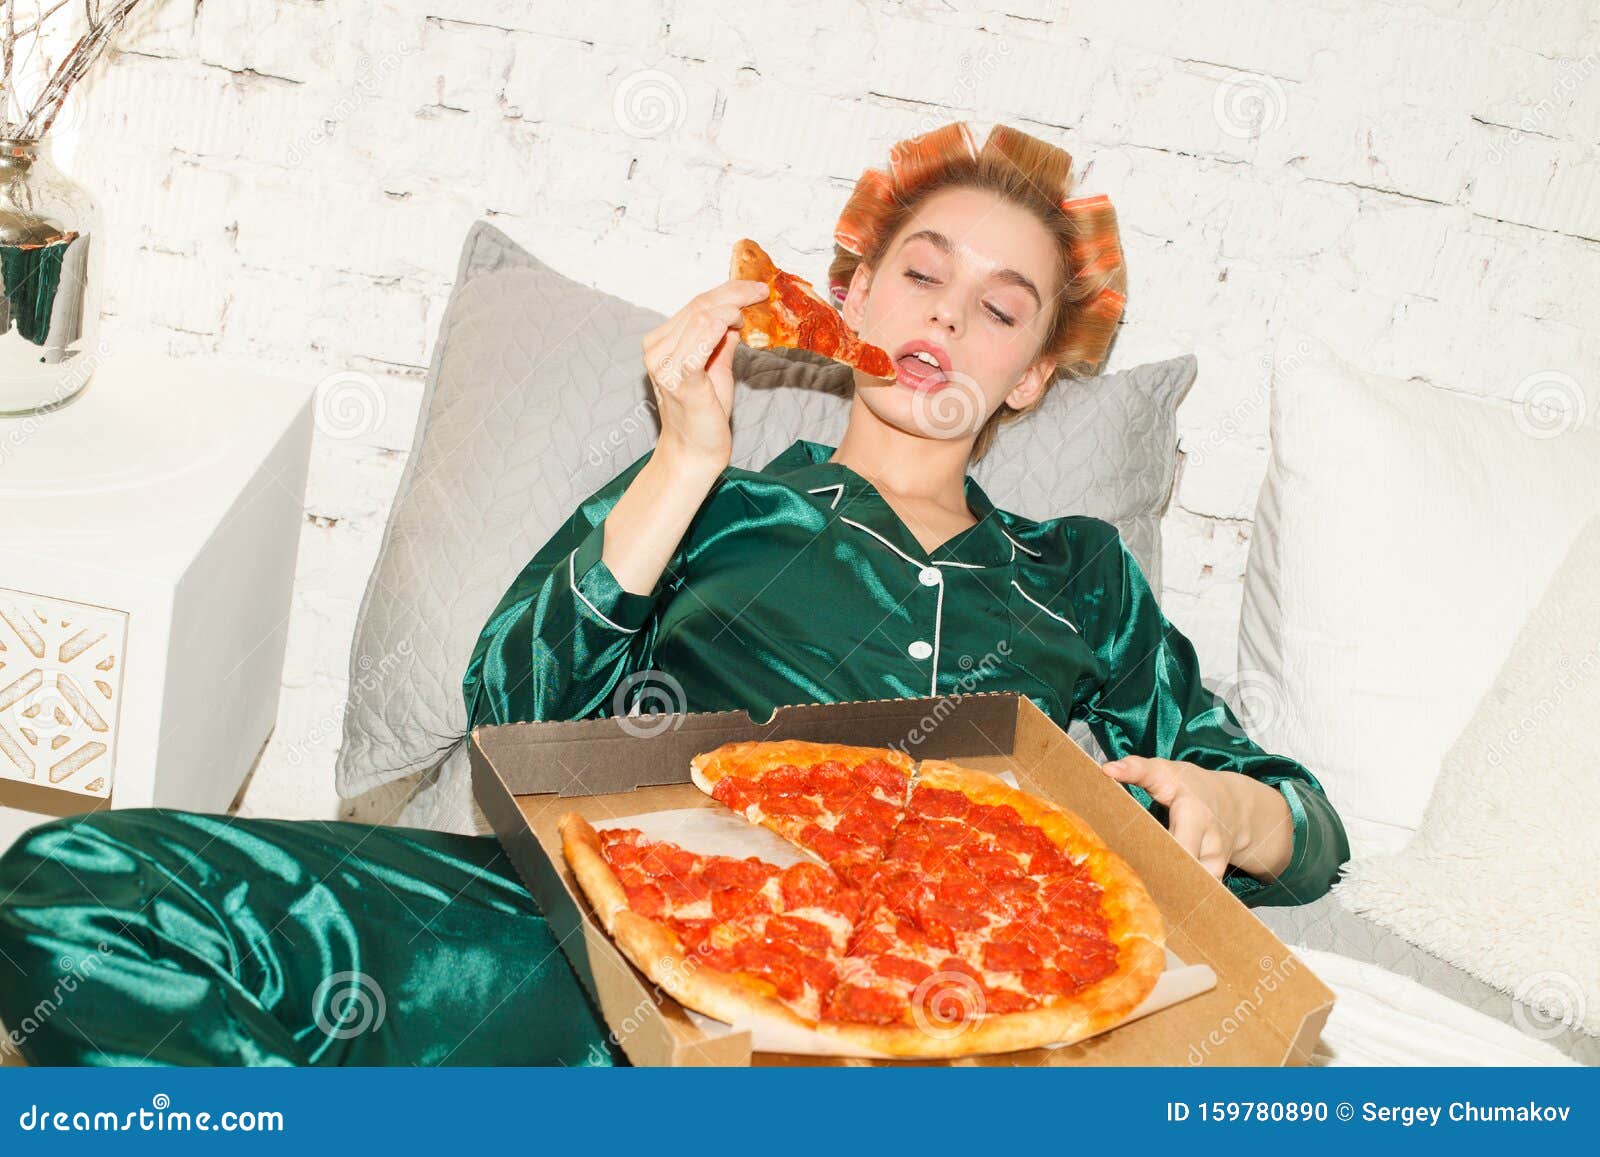 Lazy Girl In Pajamas Eating Pizza In Bedroom Stock Photo Image Of